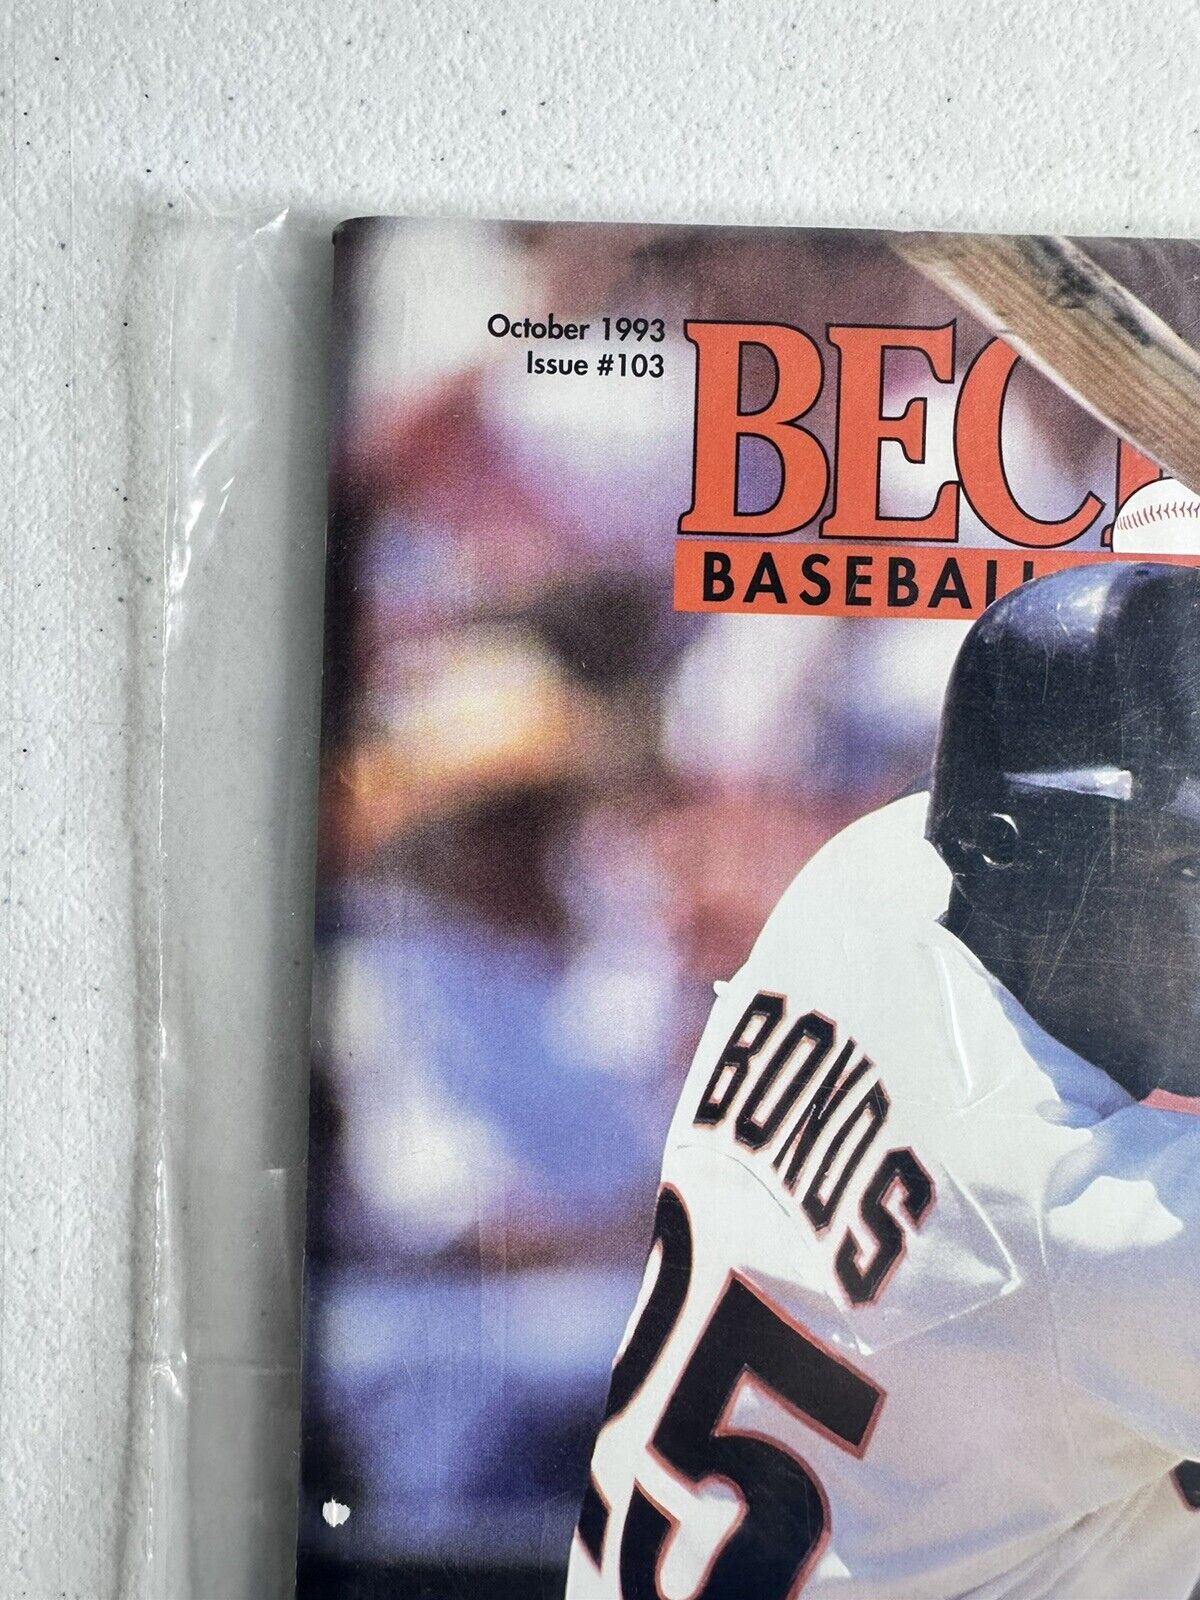 Sealed New Beckett Baseball Monthly Magazine October 1993 - Barry Bonds Edition - San Francisco Giants Collectible - TreasuTiques